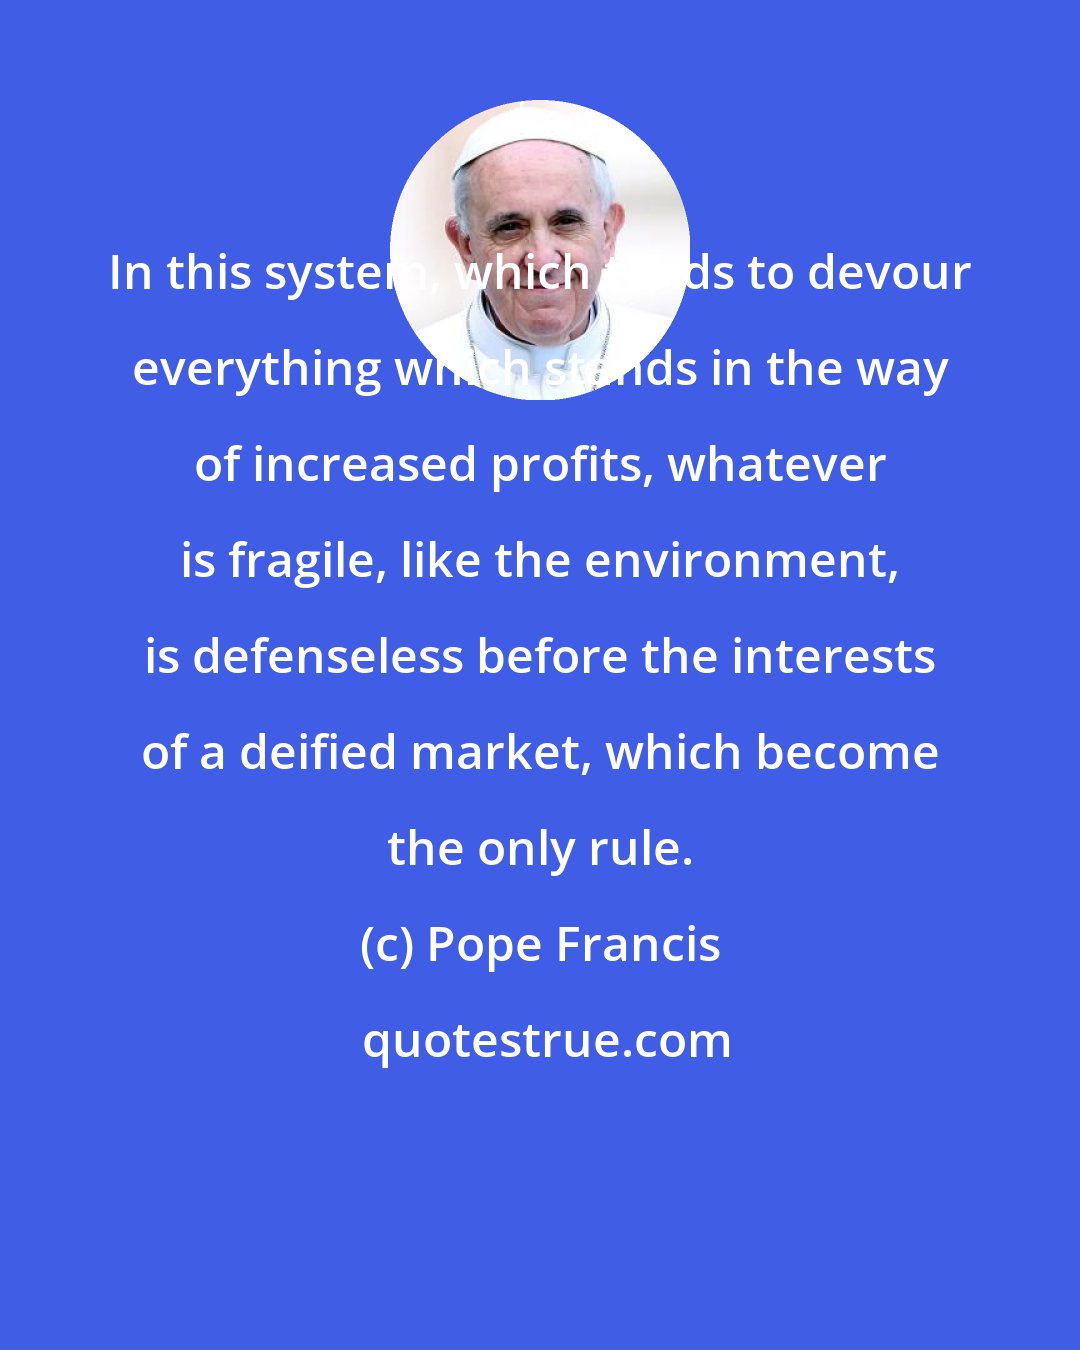 Pope Francis: In this system, which tends to devour everything which stands in the way of increased profits, whatever is fragile, like the environment, is defenseless before the interests of a deified market, which become the only rule.